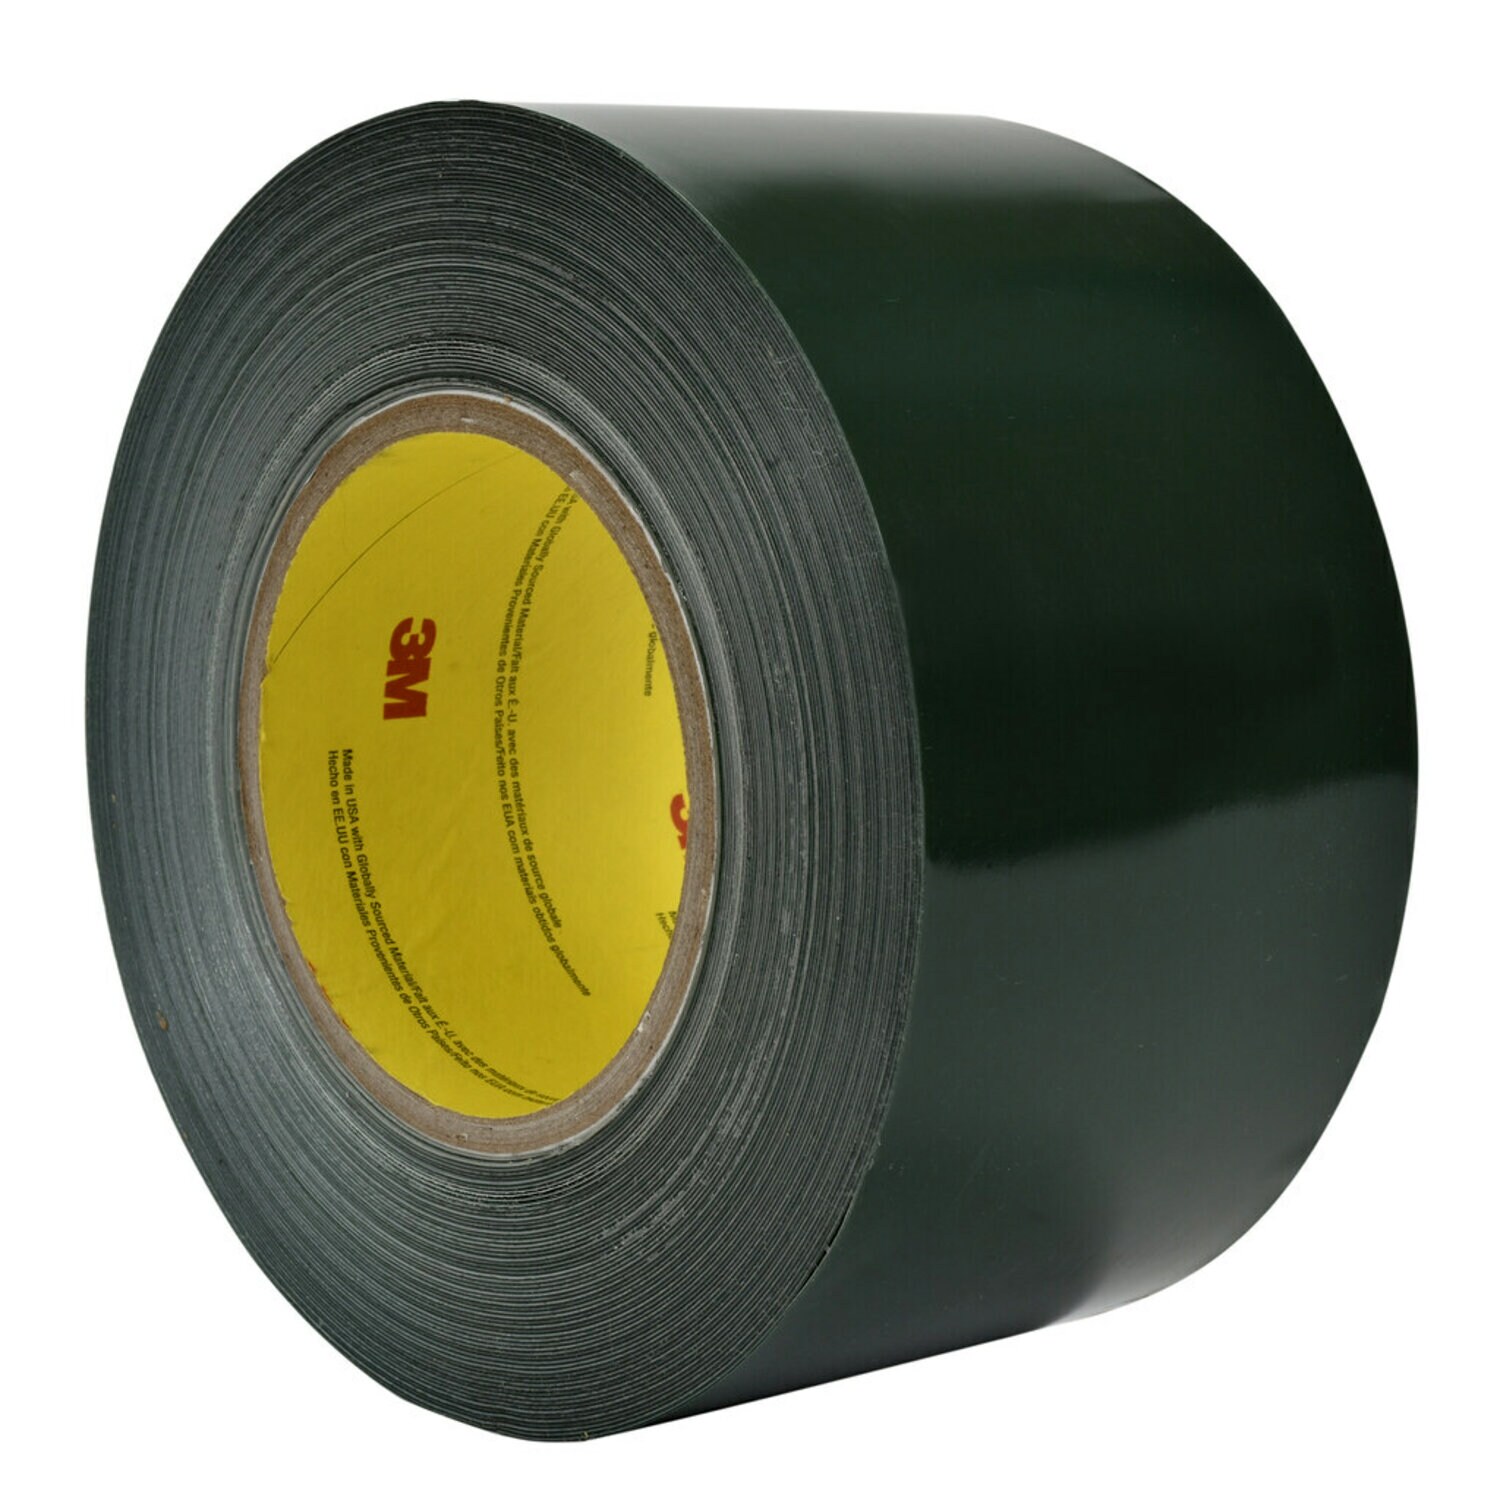 7100170120 - 3M Sealing and Holding Tape 8069, 6 in x 25 yd, 8 Rolls/Case, Solid
Liner